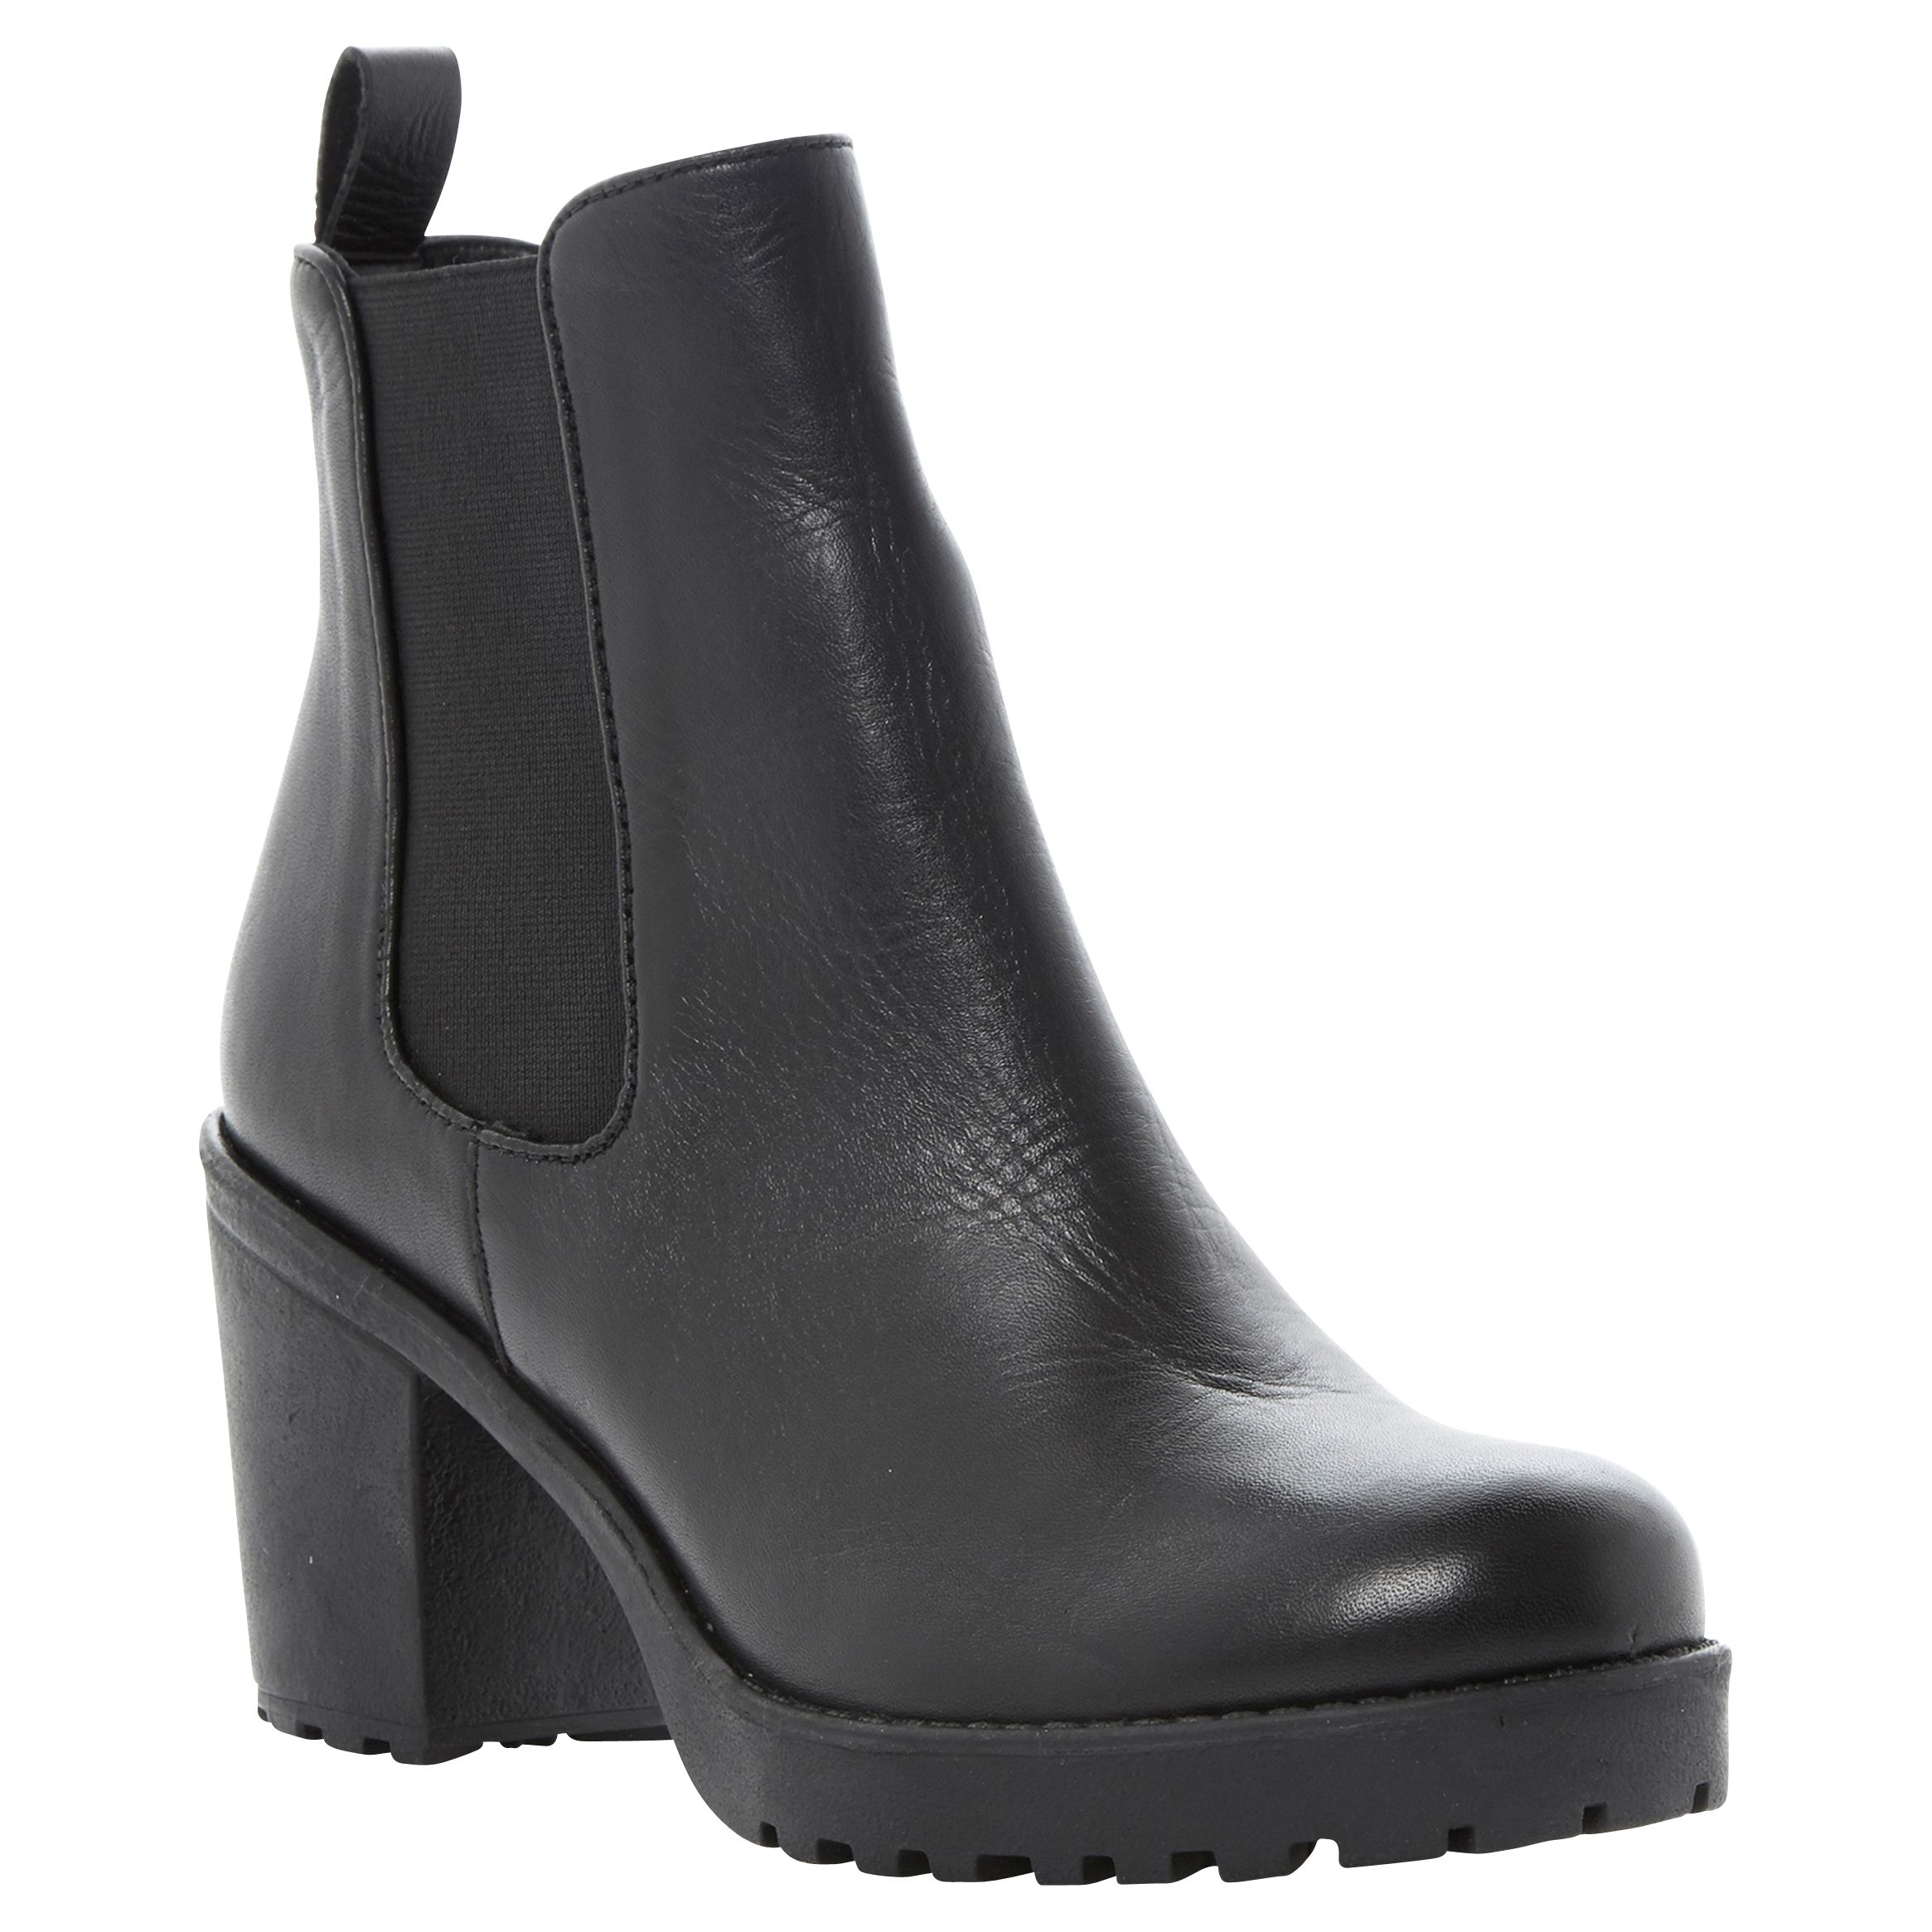 Dune Pring Heeled Cleated Sole Leather Chelsea Ankle Boots